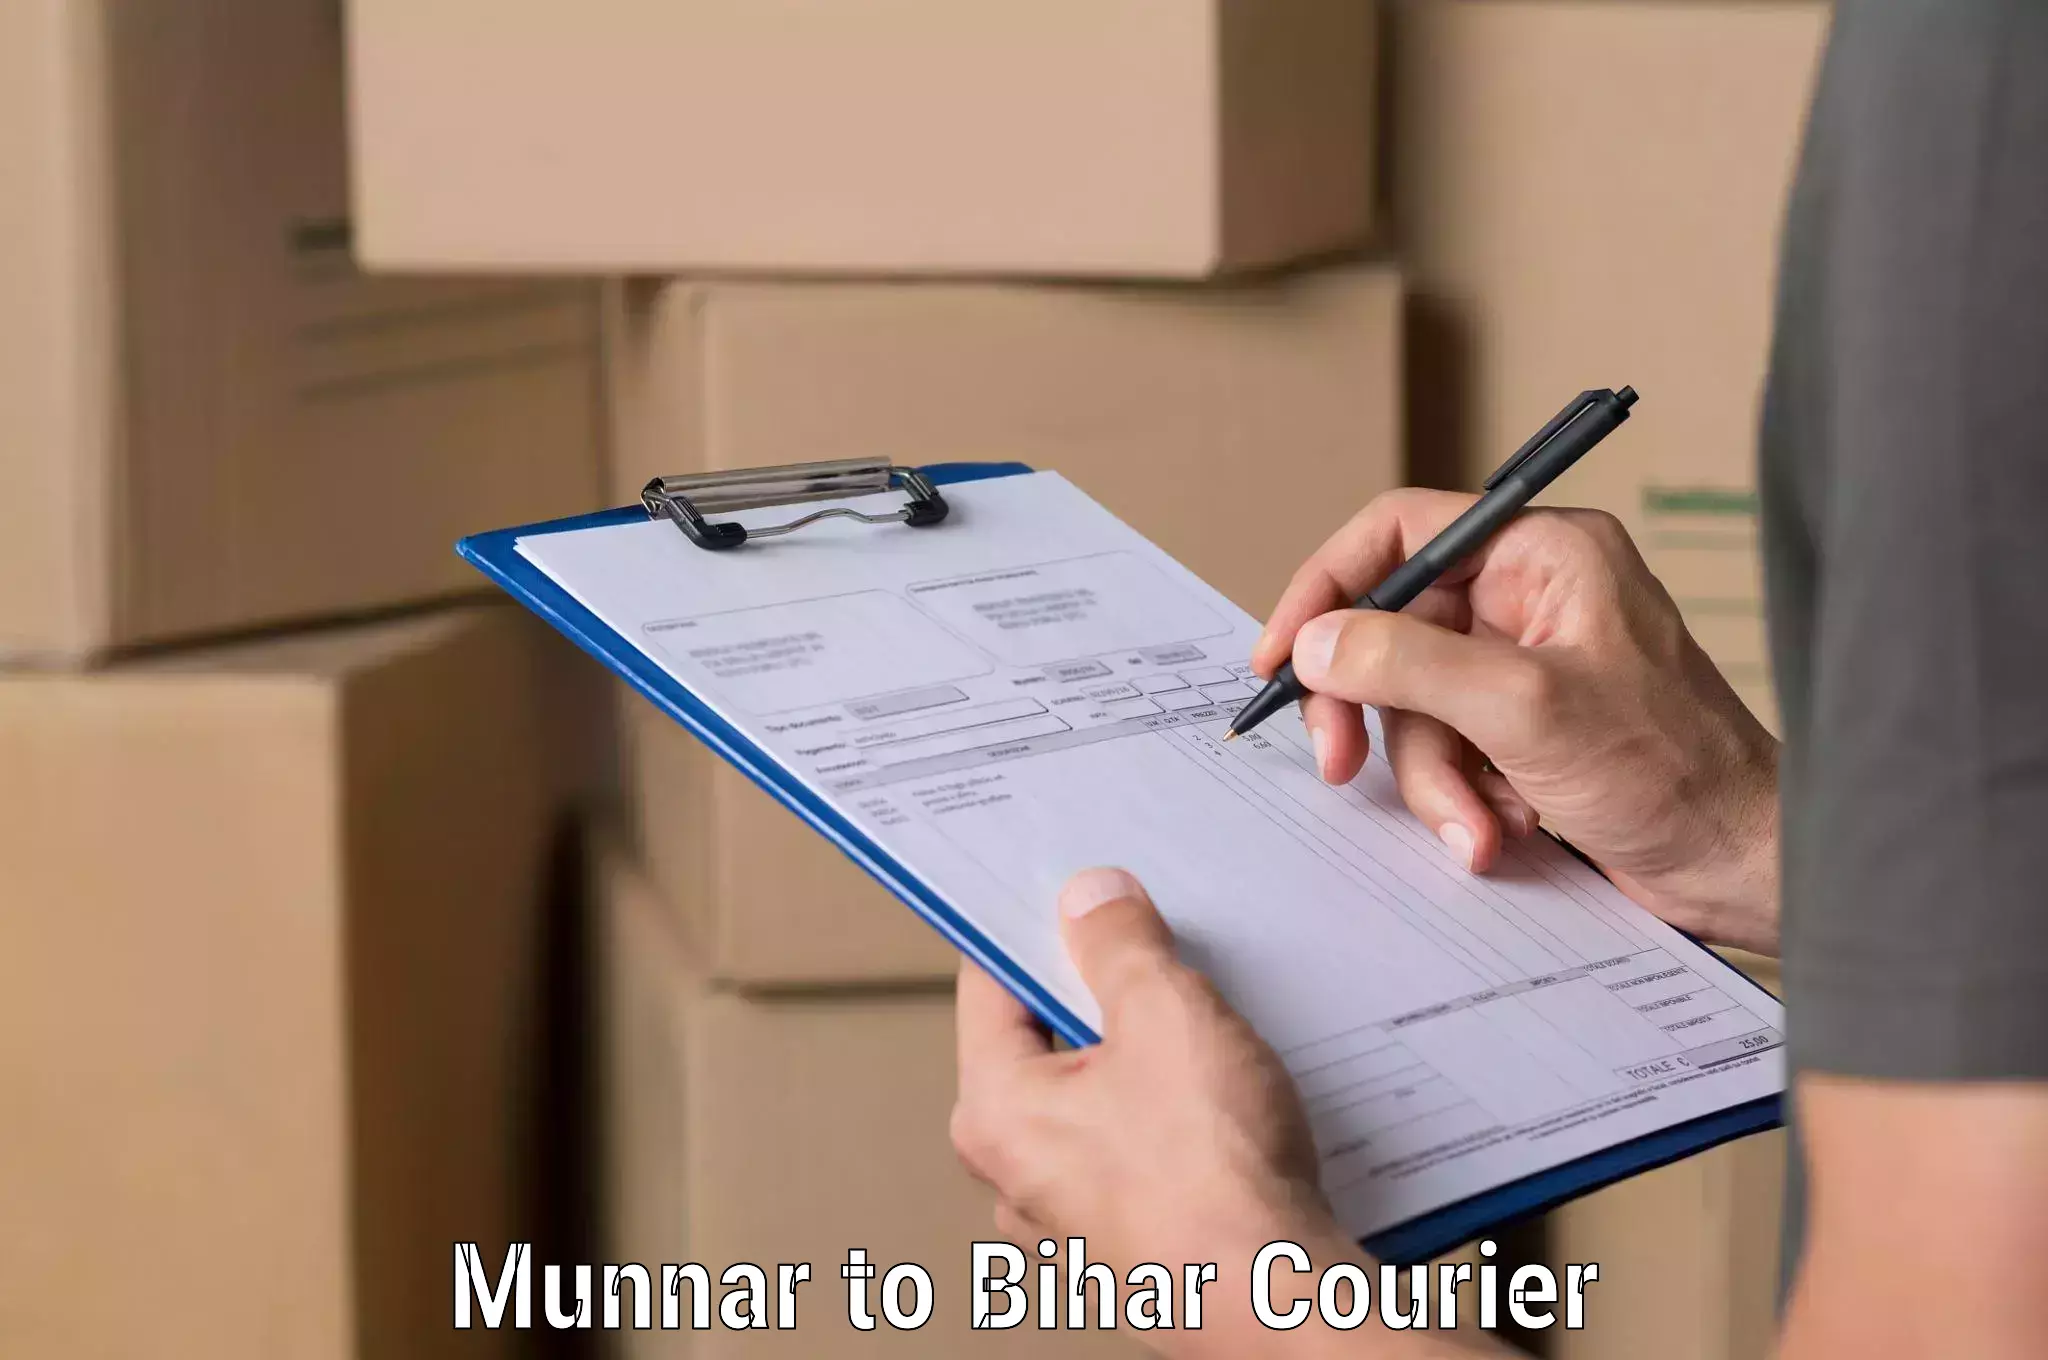 Flexible delivery scheduling Munnar to Bihar